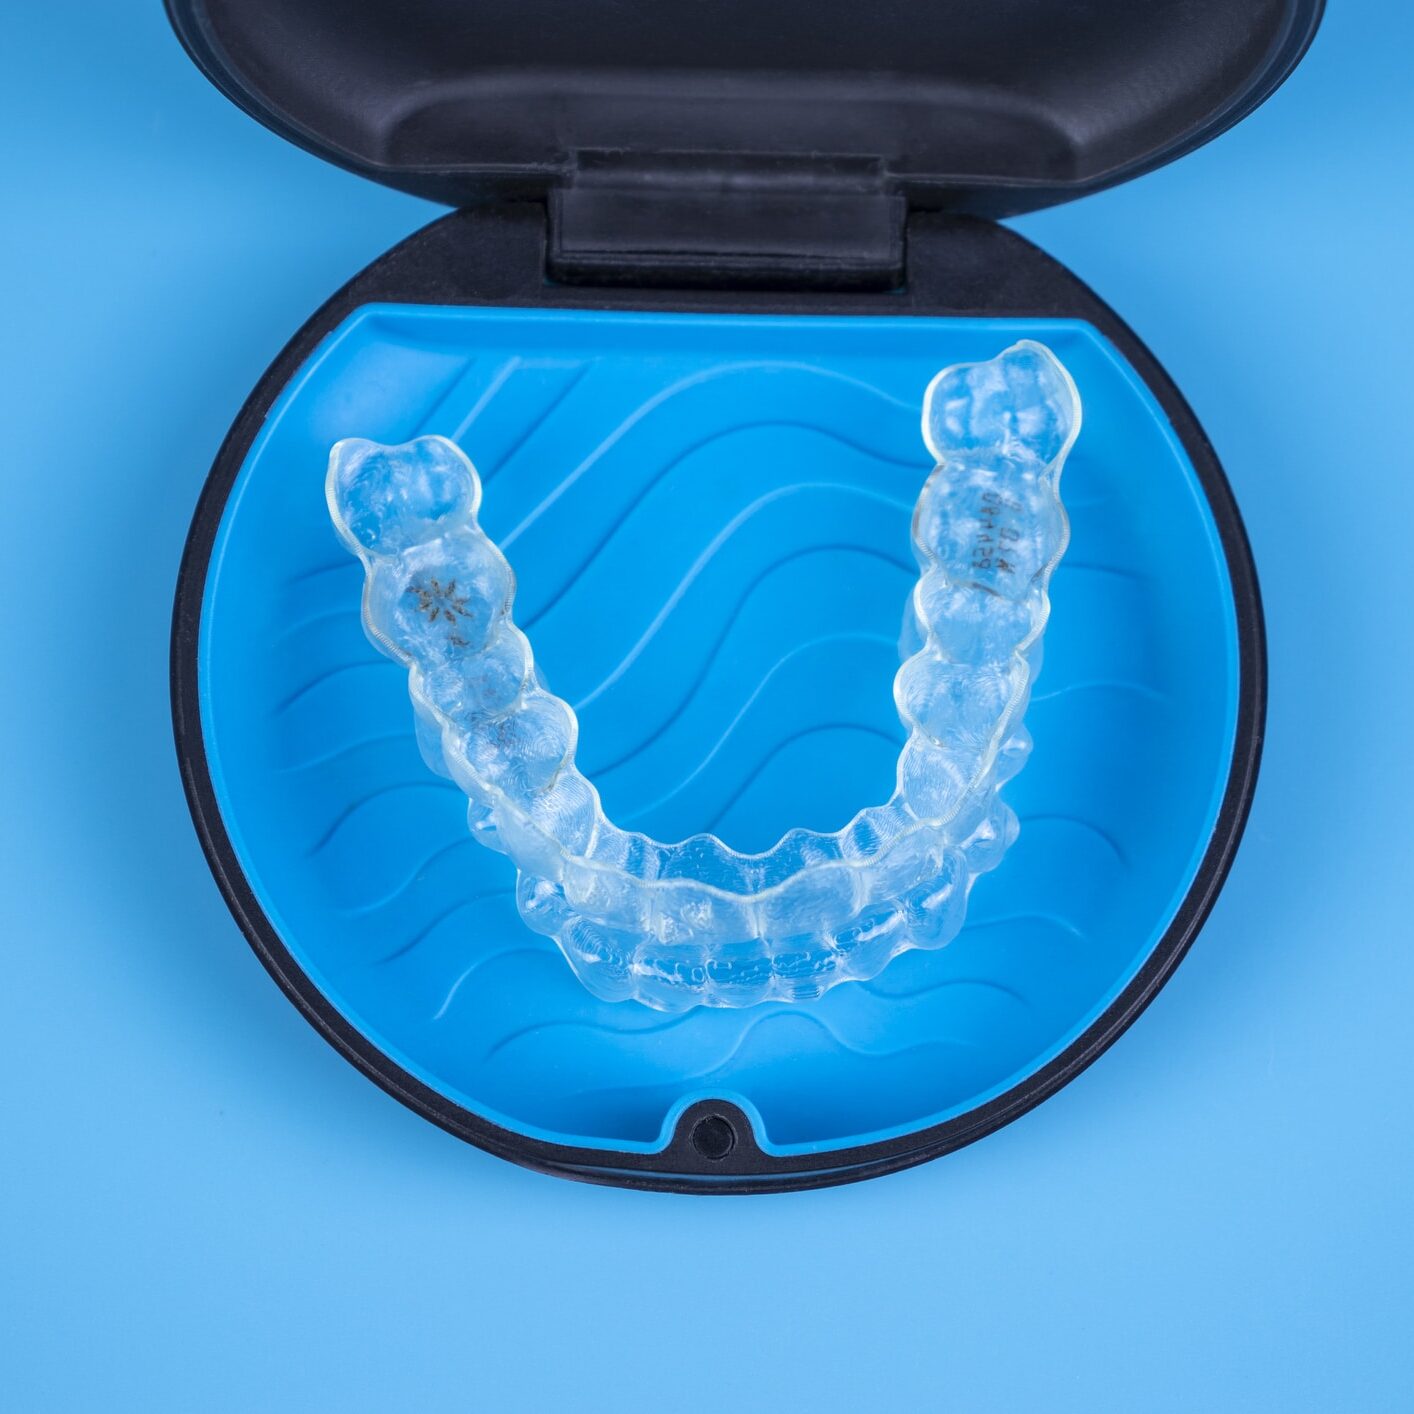 invisalign clear aligners resting inside of their carrying case